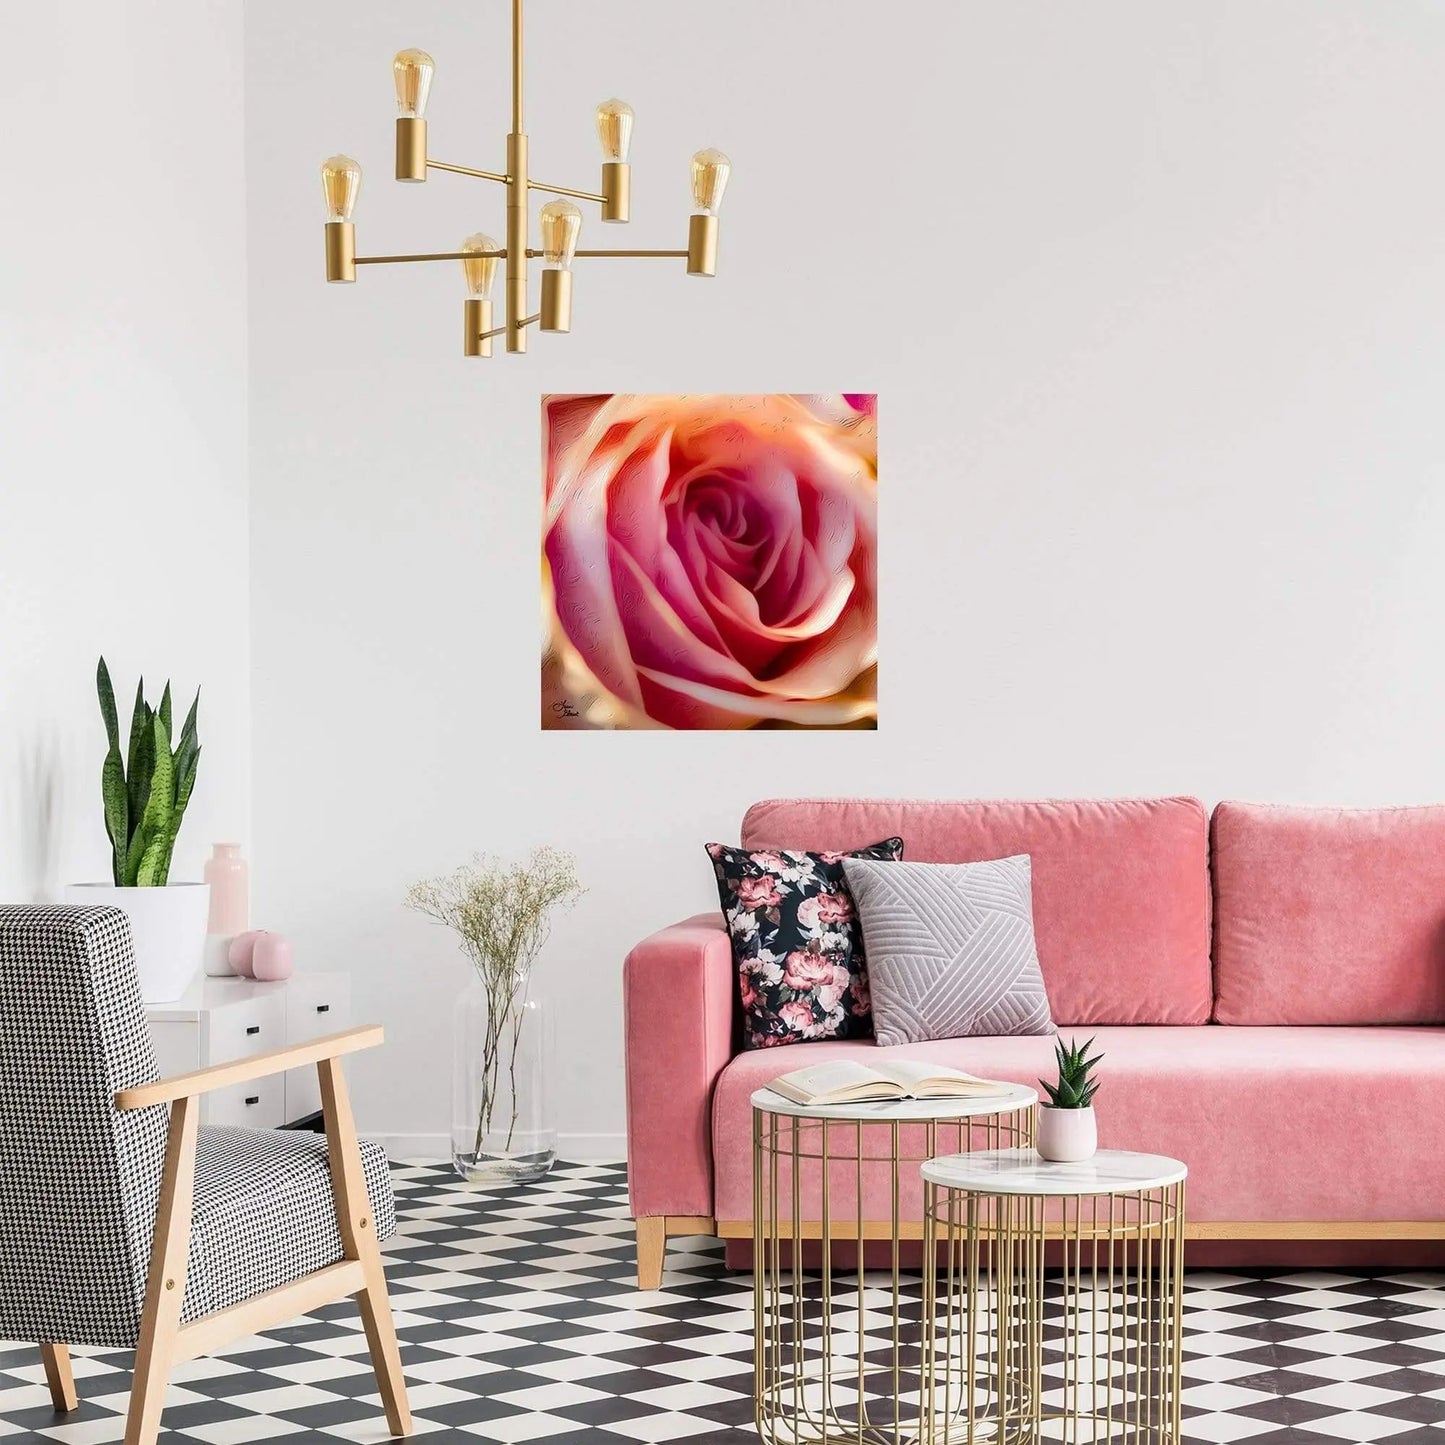 Pink rose art displayed in a trendy room above a pink couch